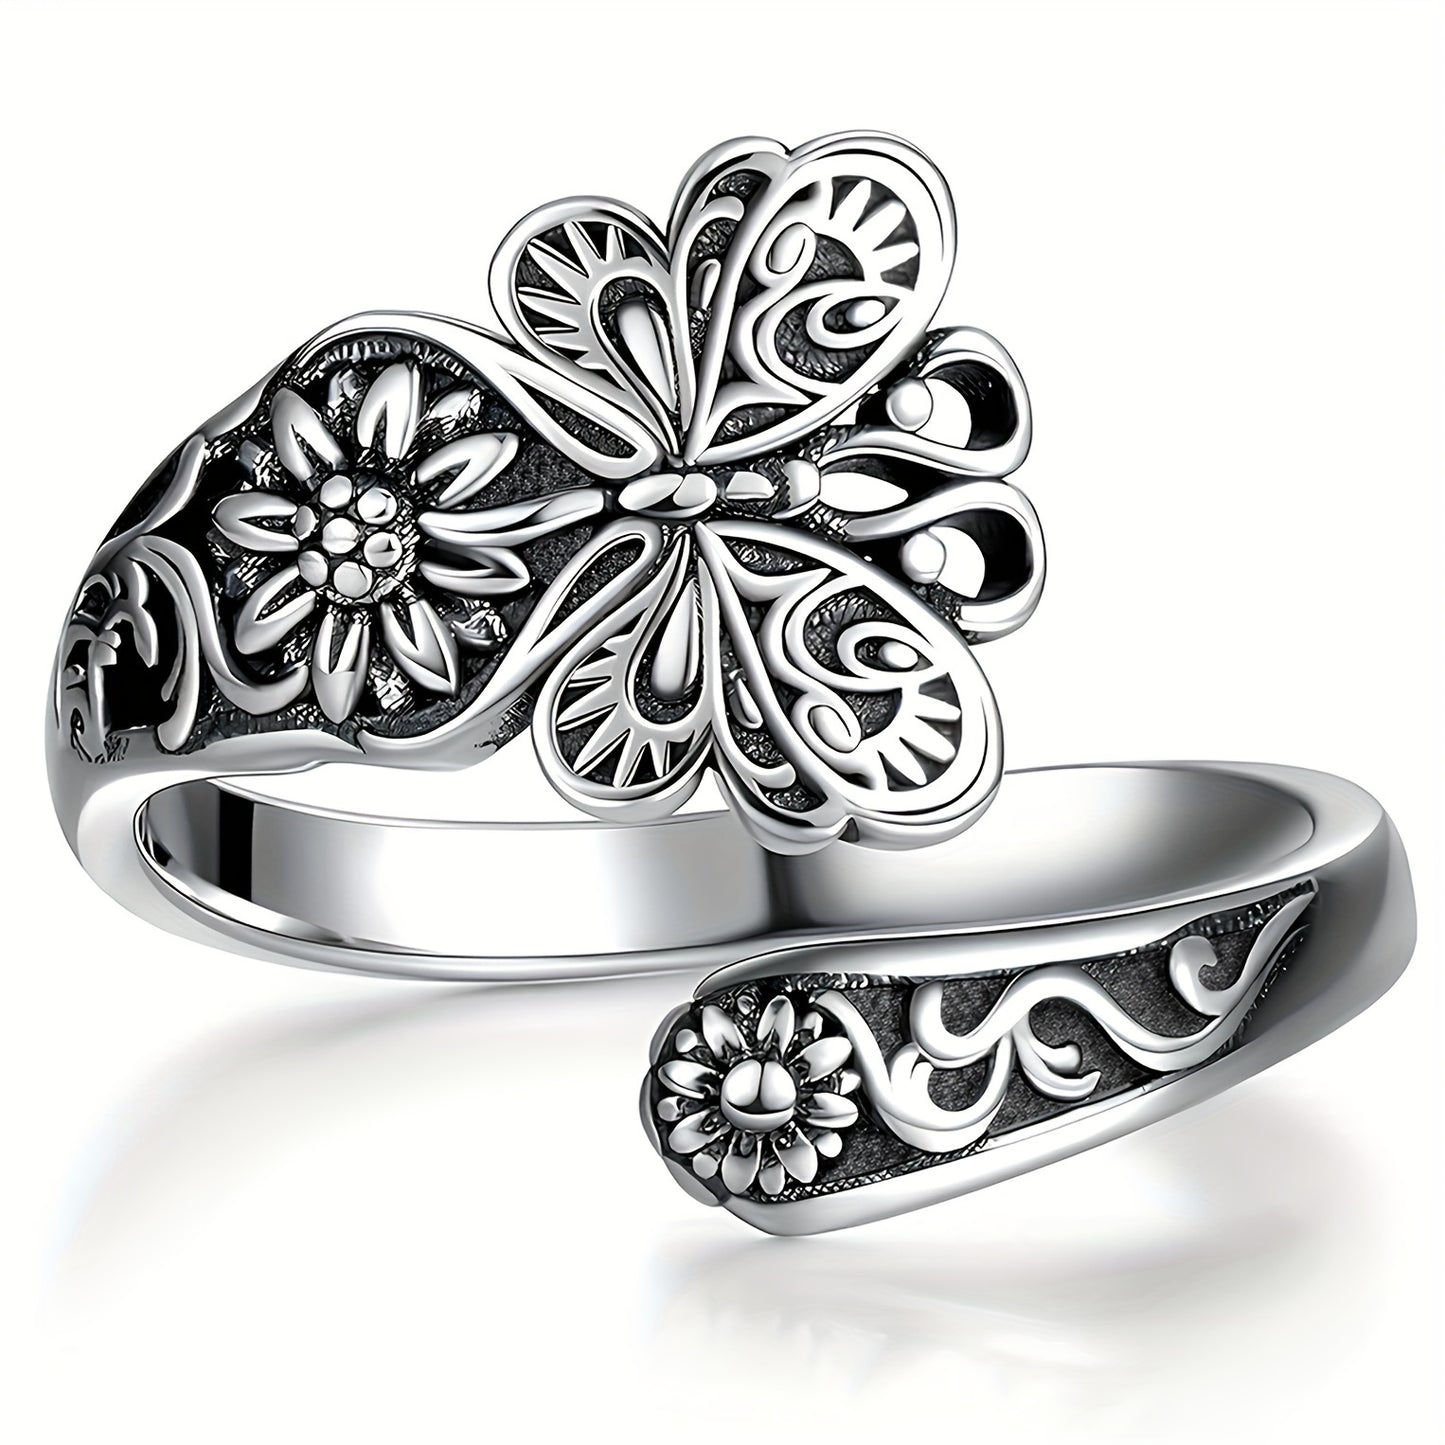 925 Sterling Silver Spoon Ring Retro Butterfly & Flower Carving 18k Gold Plated Symbol Of Beauty And History High Quality Gift For That Special Person With Gift Box